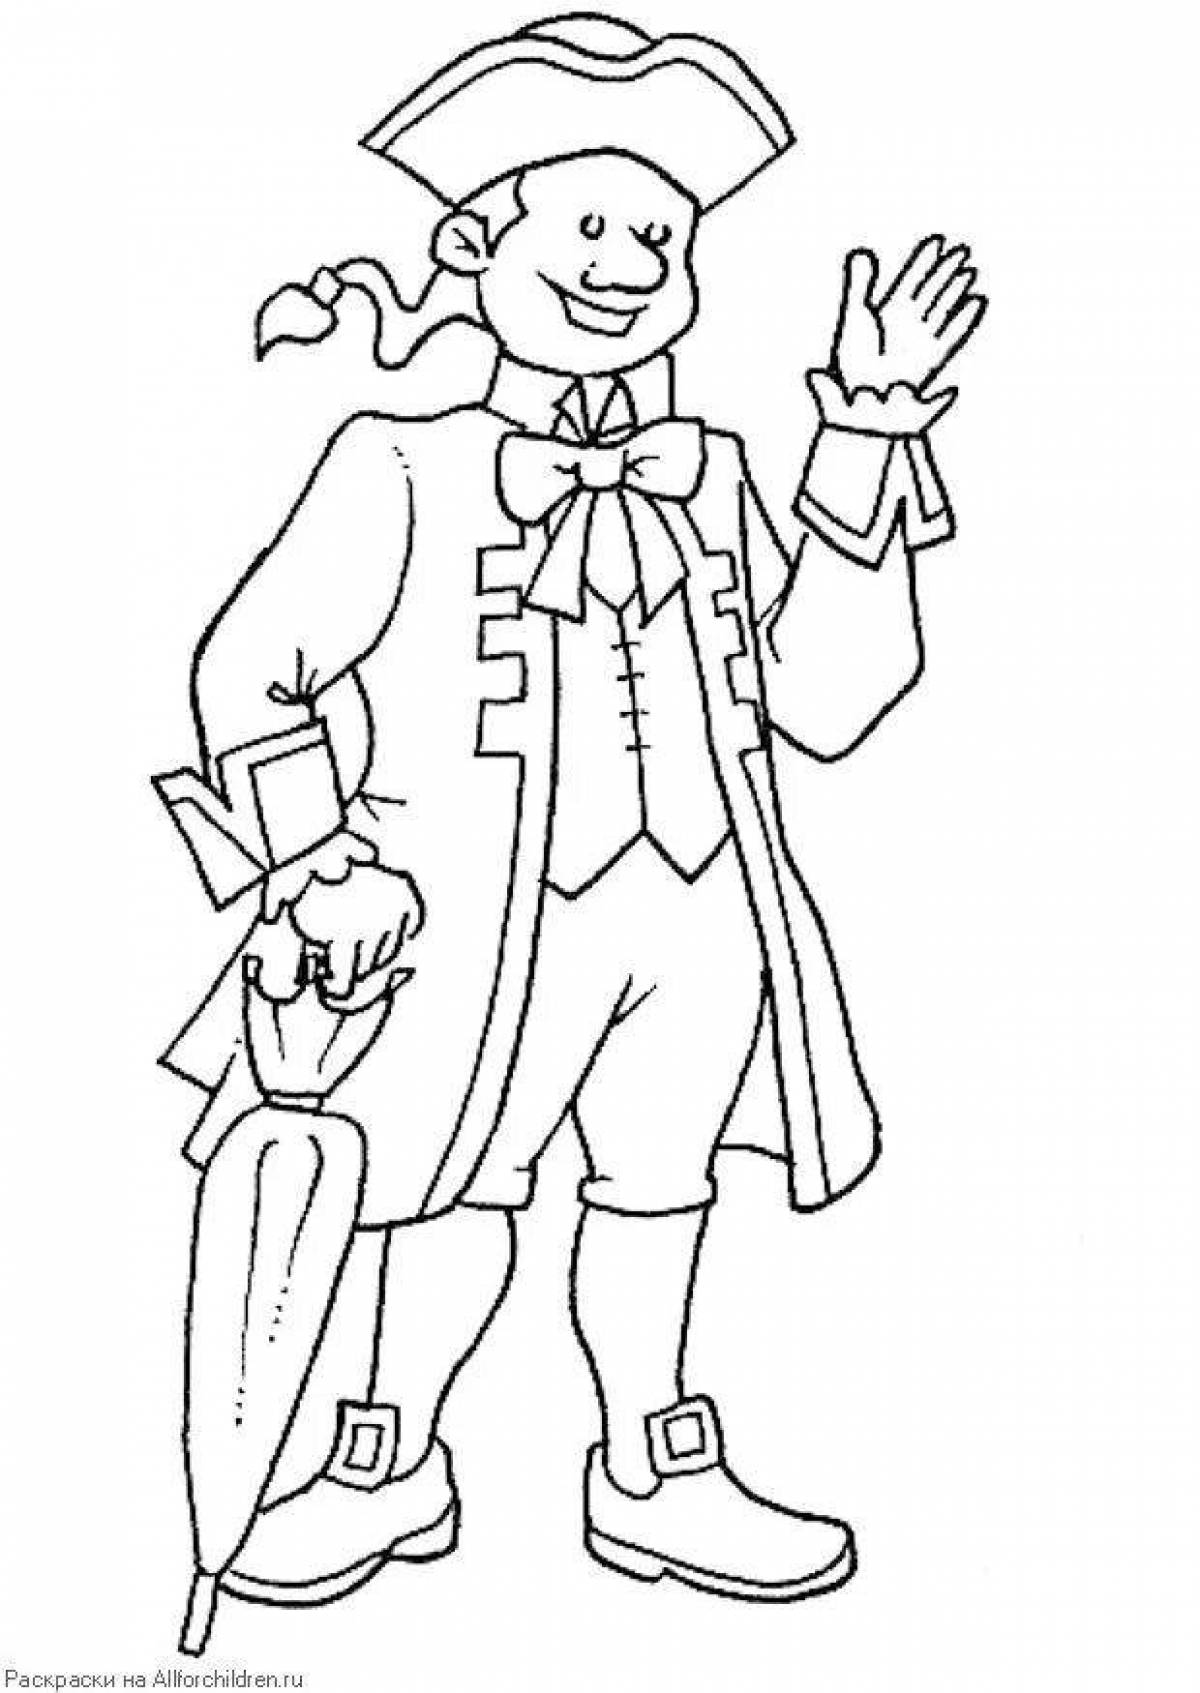 Coloring page colorful theatrical costume